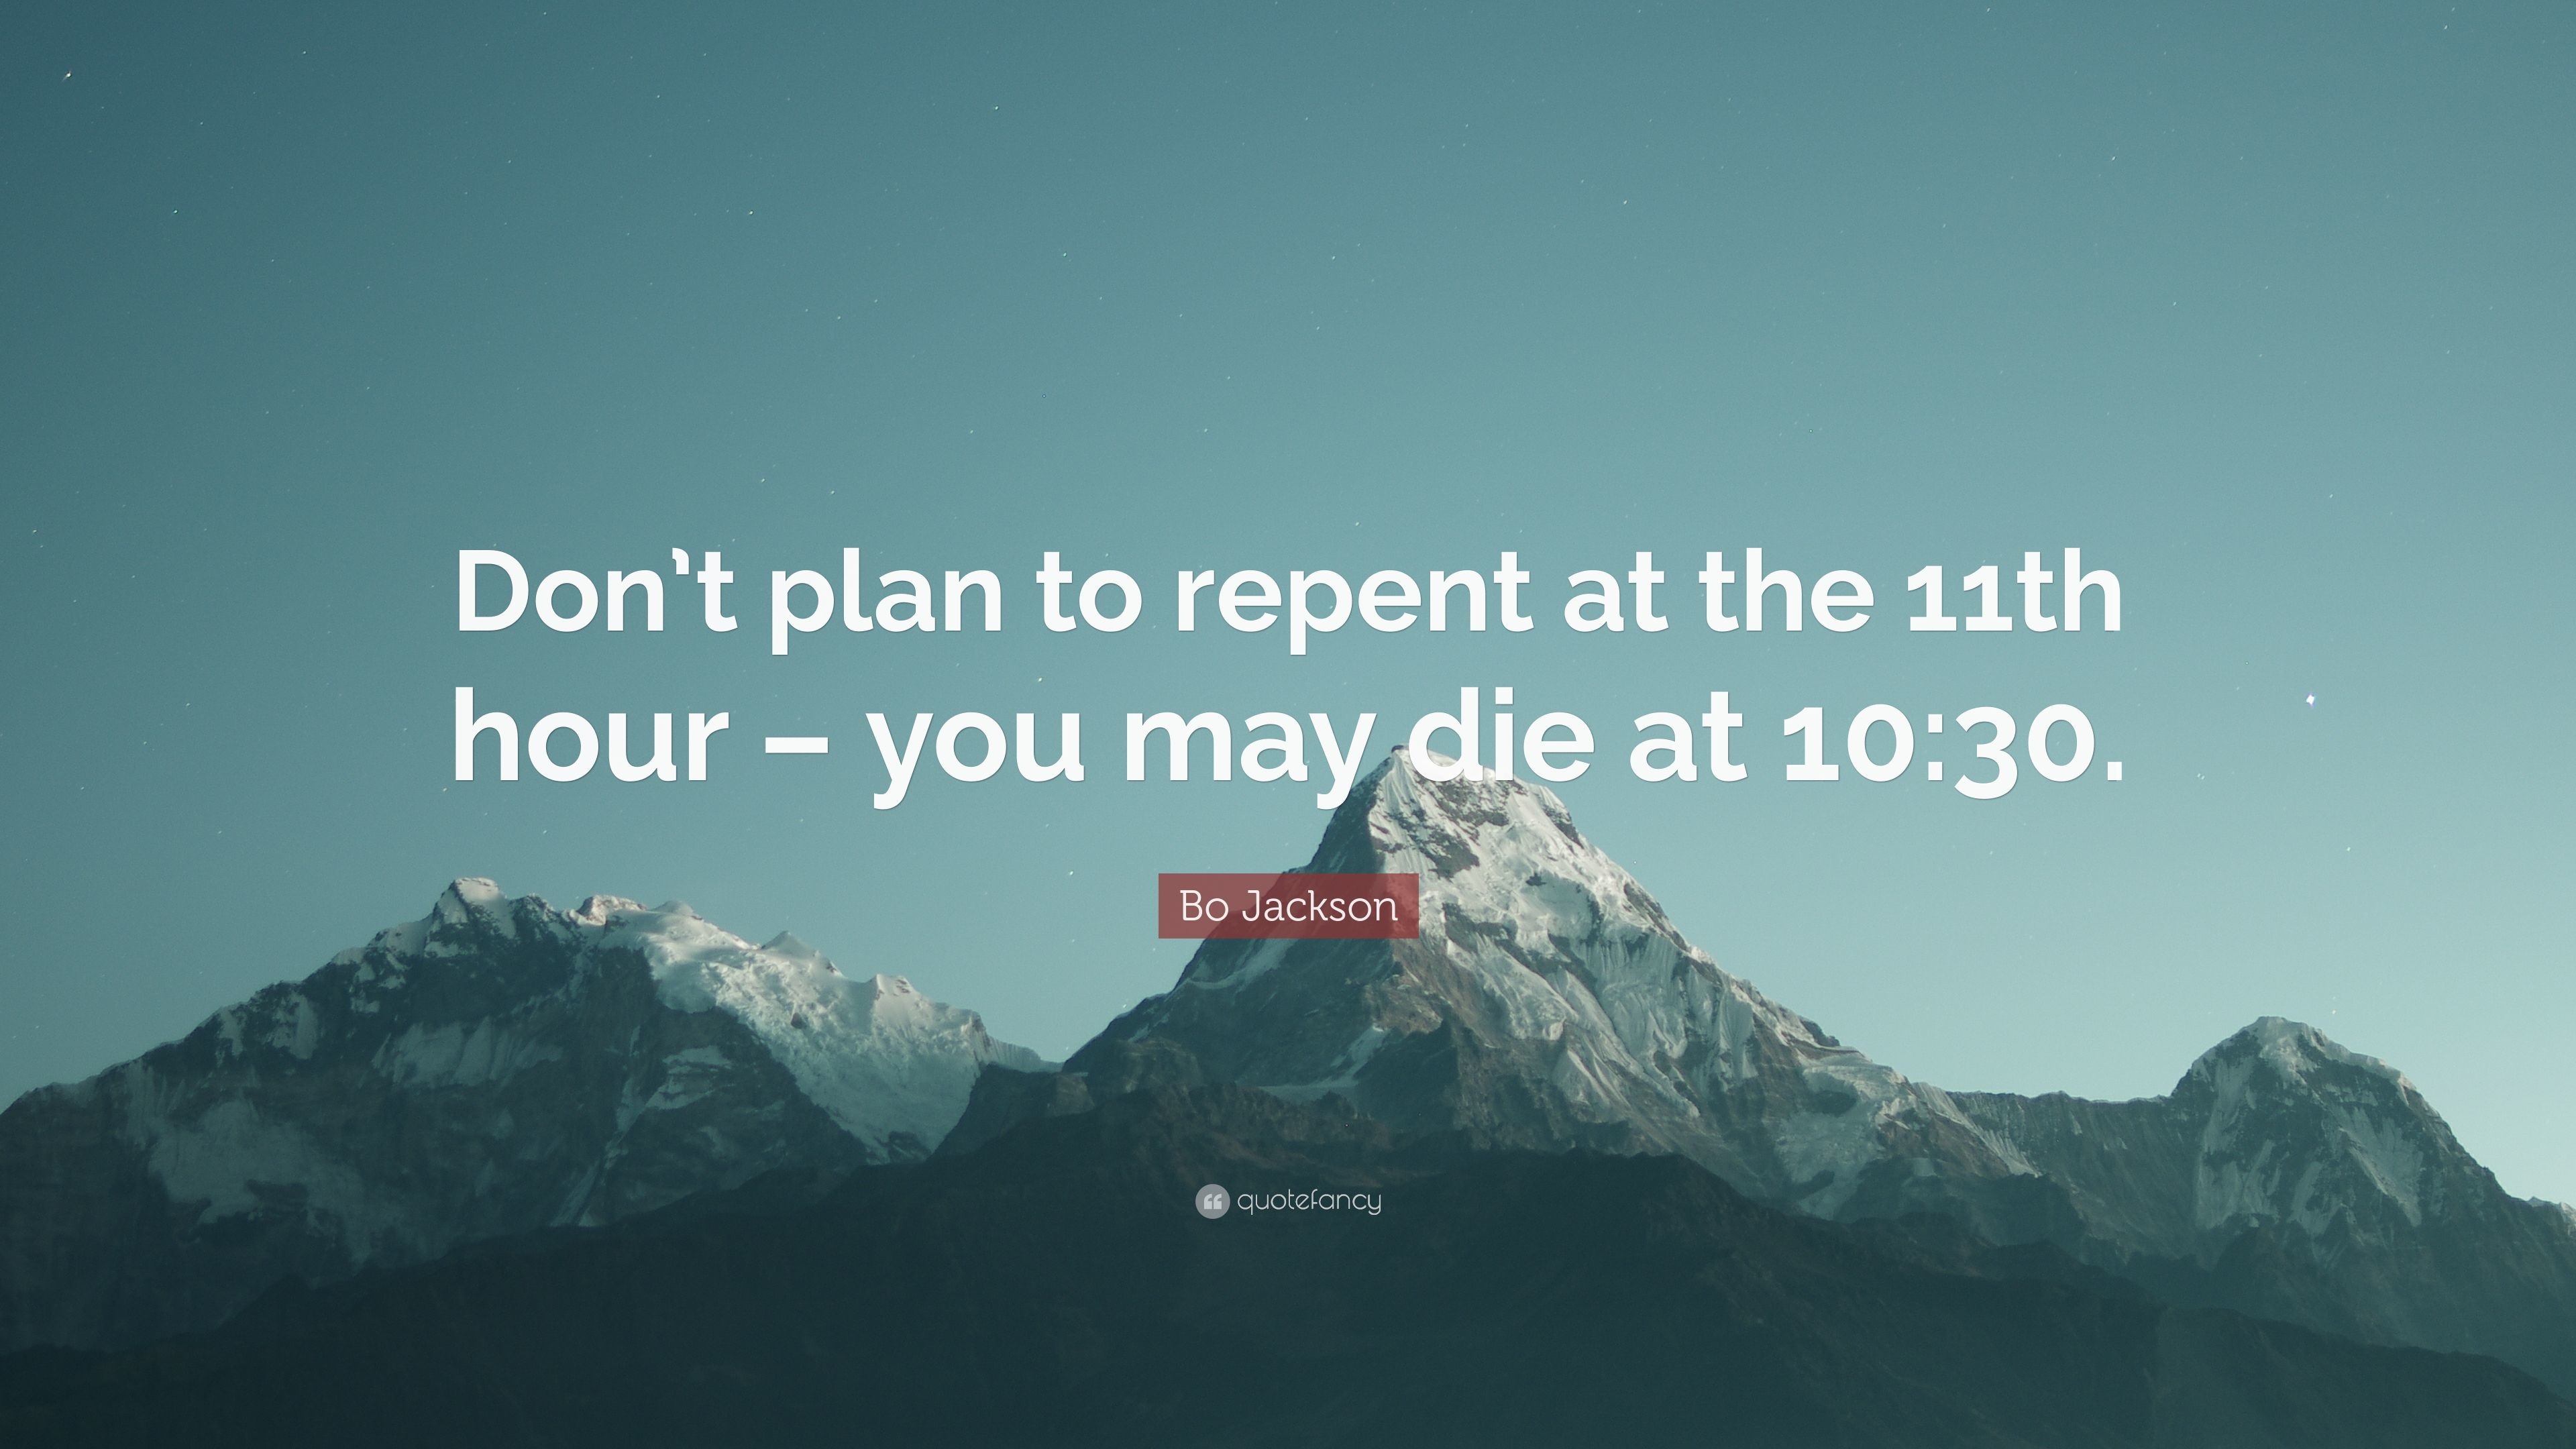 Bo Jackson Quote Dont plan to repent at the 11th hour